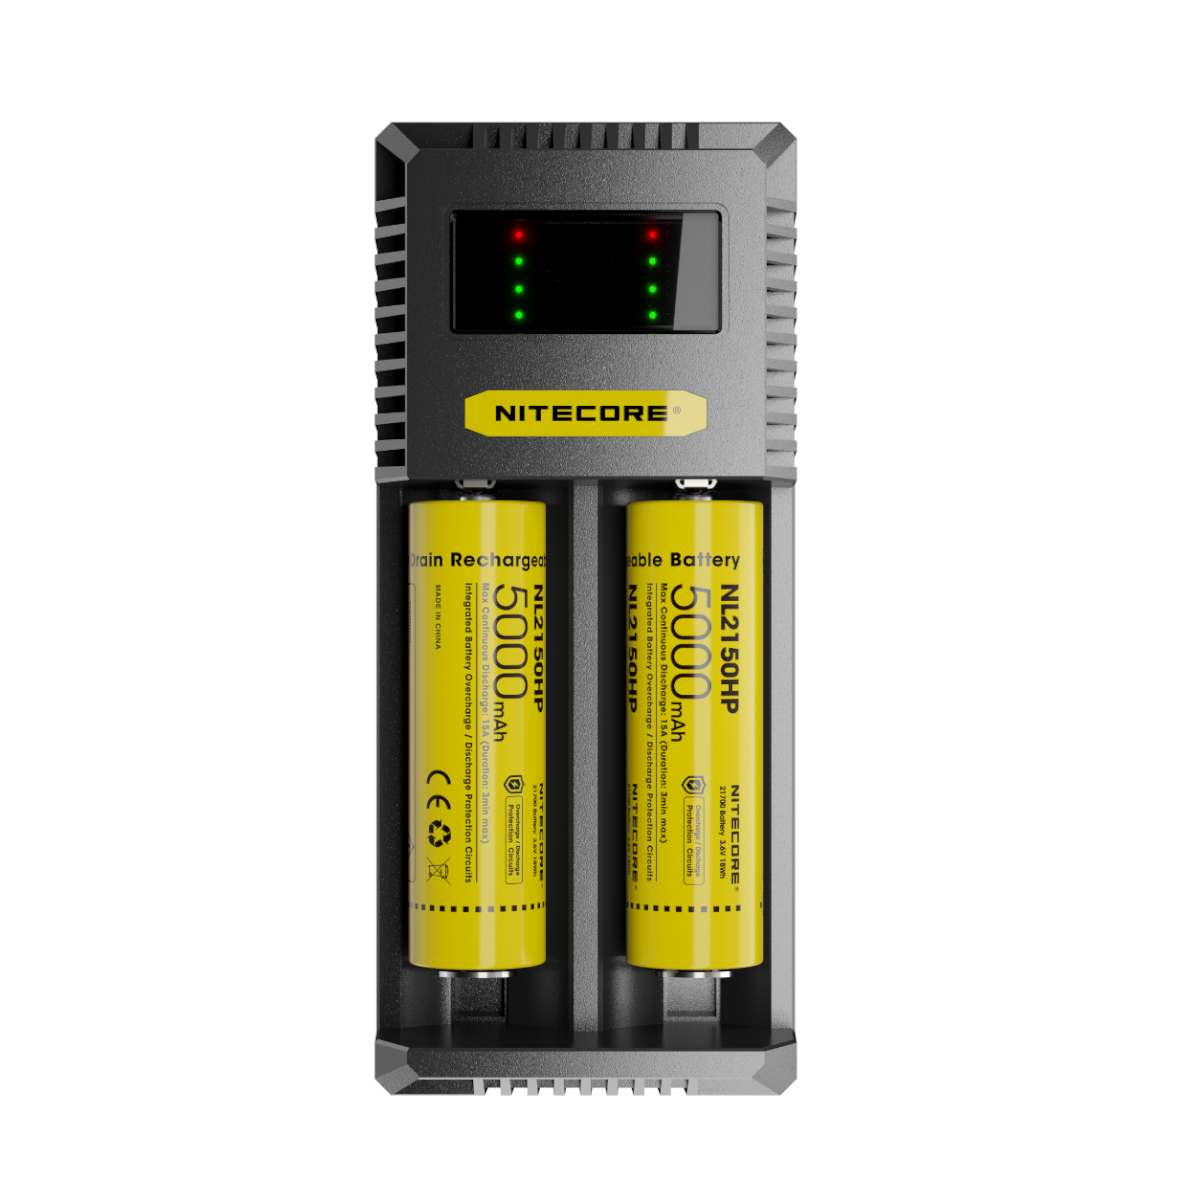 best price,nitecore,ci2,battery,charger,discount